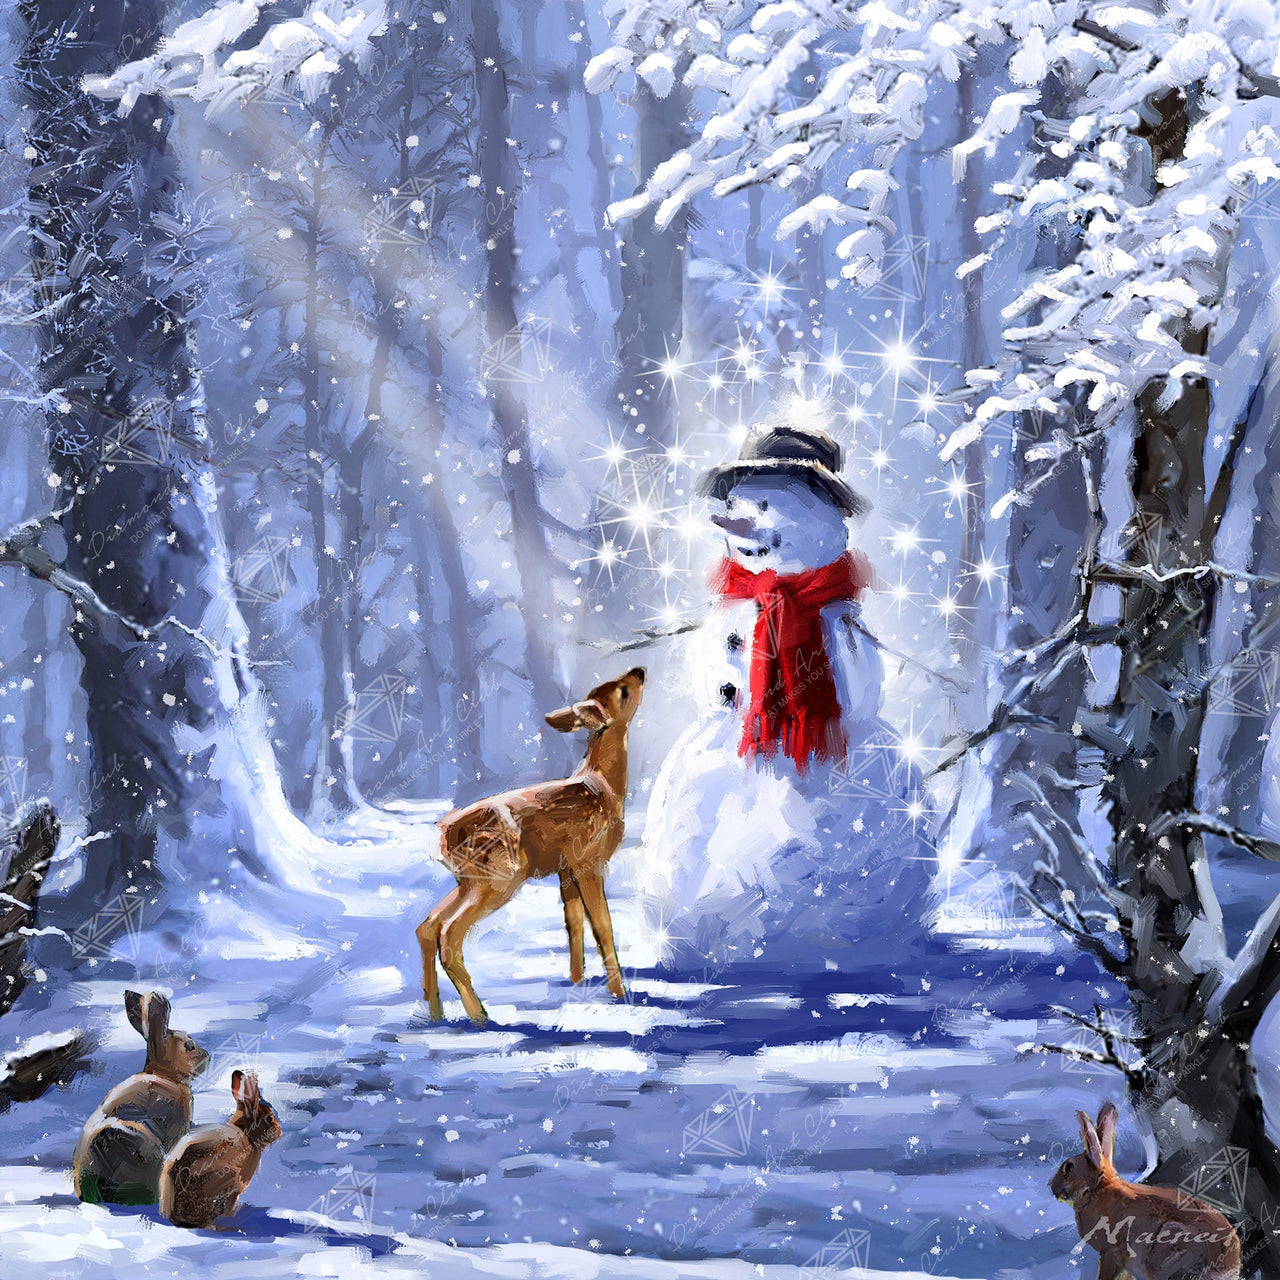 Diamond Painting Forest Snowman 22" x 22″ (56cm x 56cm) / Square With 40 Colors Including 4 ABs